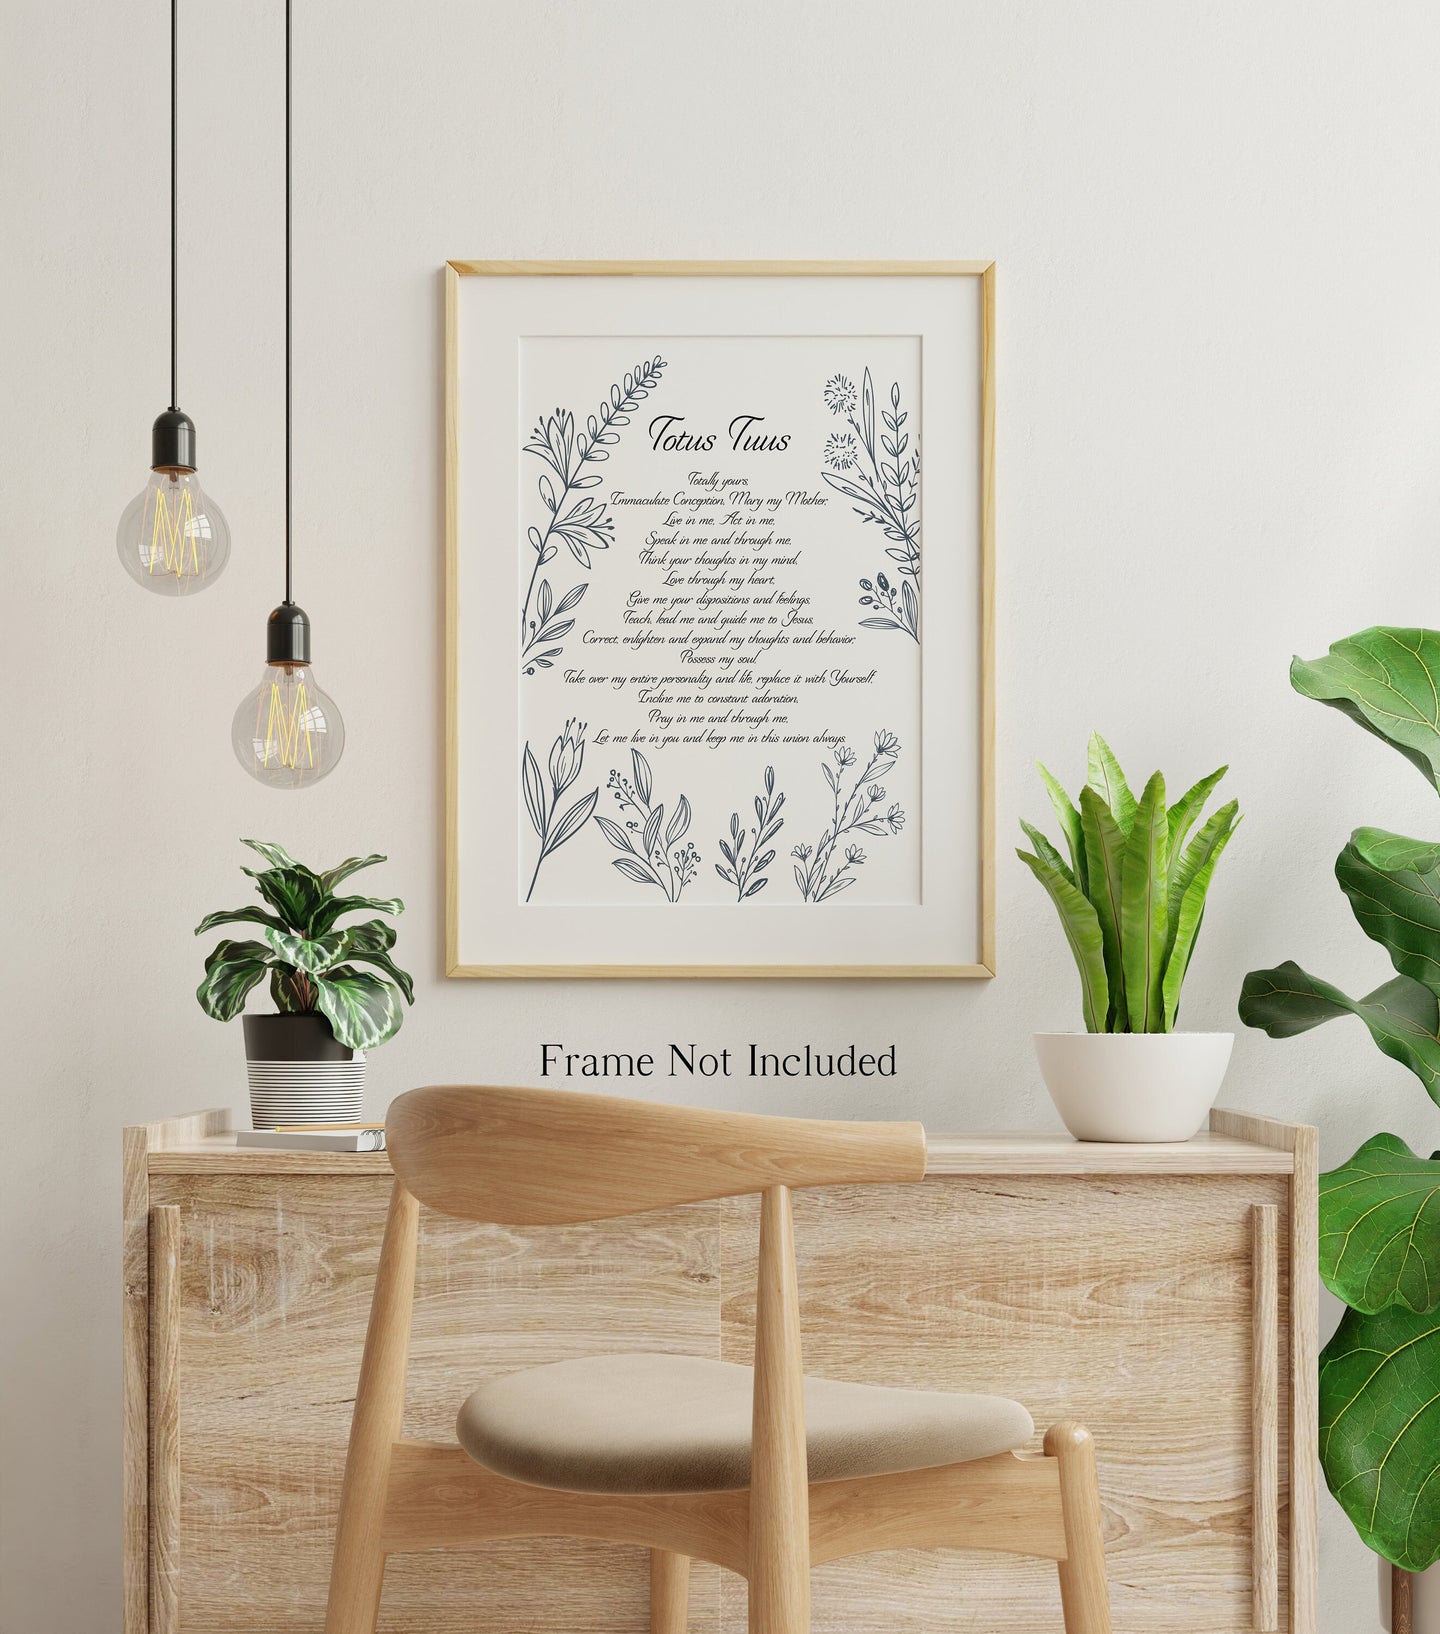 Totus Tuus Prayer Print - Totally yours Prayer, Mary my Mother - Catholic Prayer - Physical Print Without Frame - Pope John Paul II